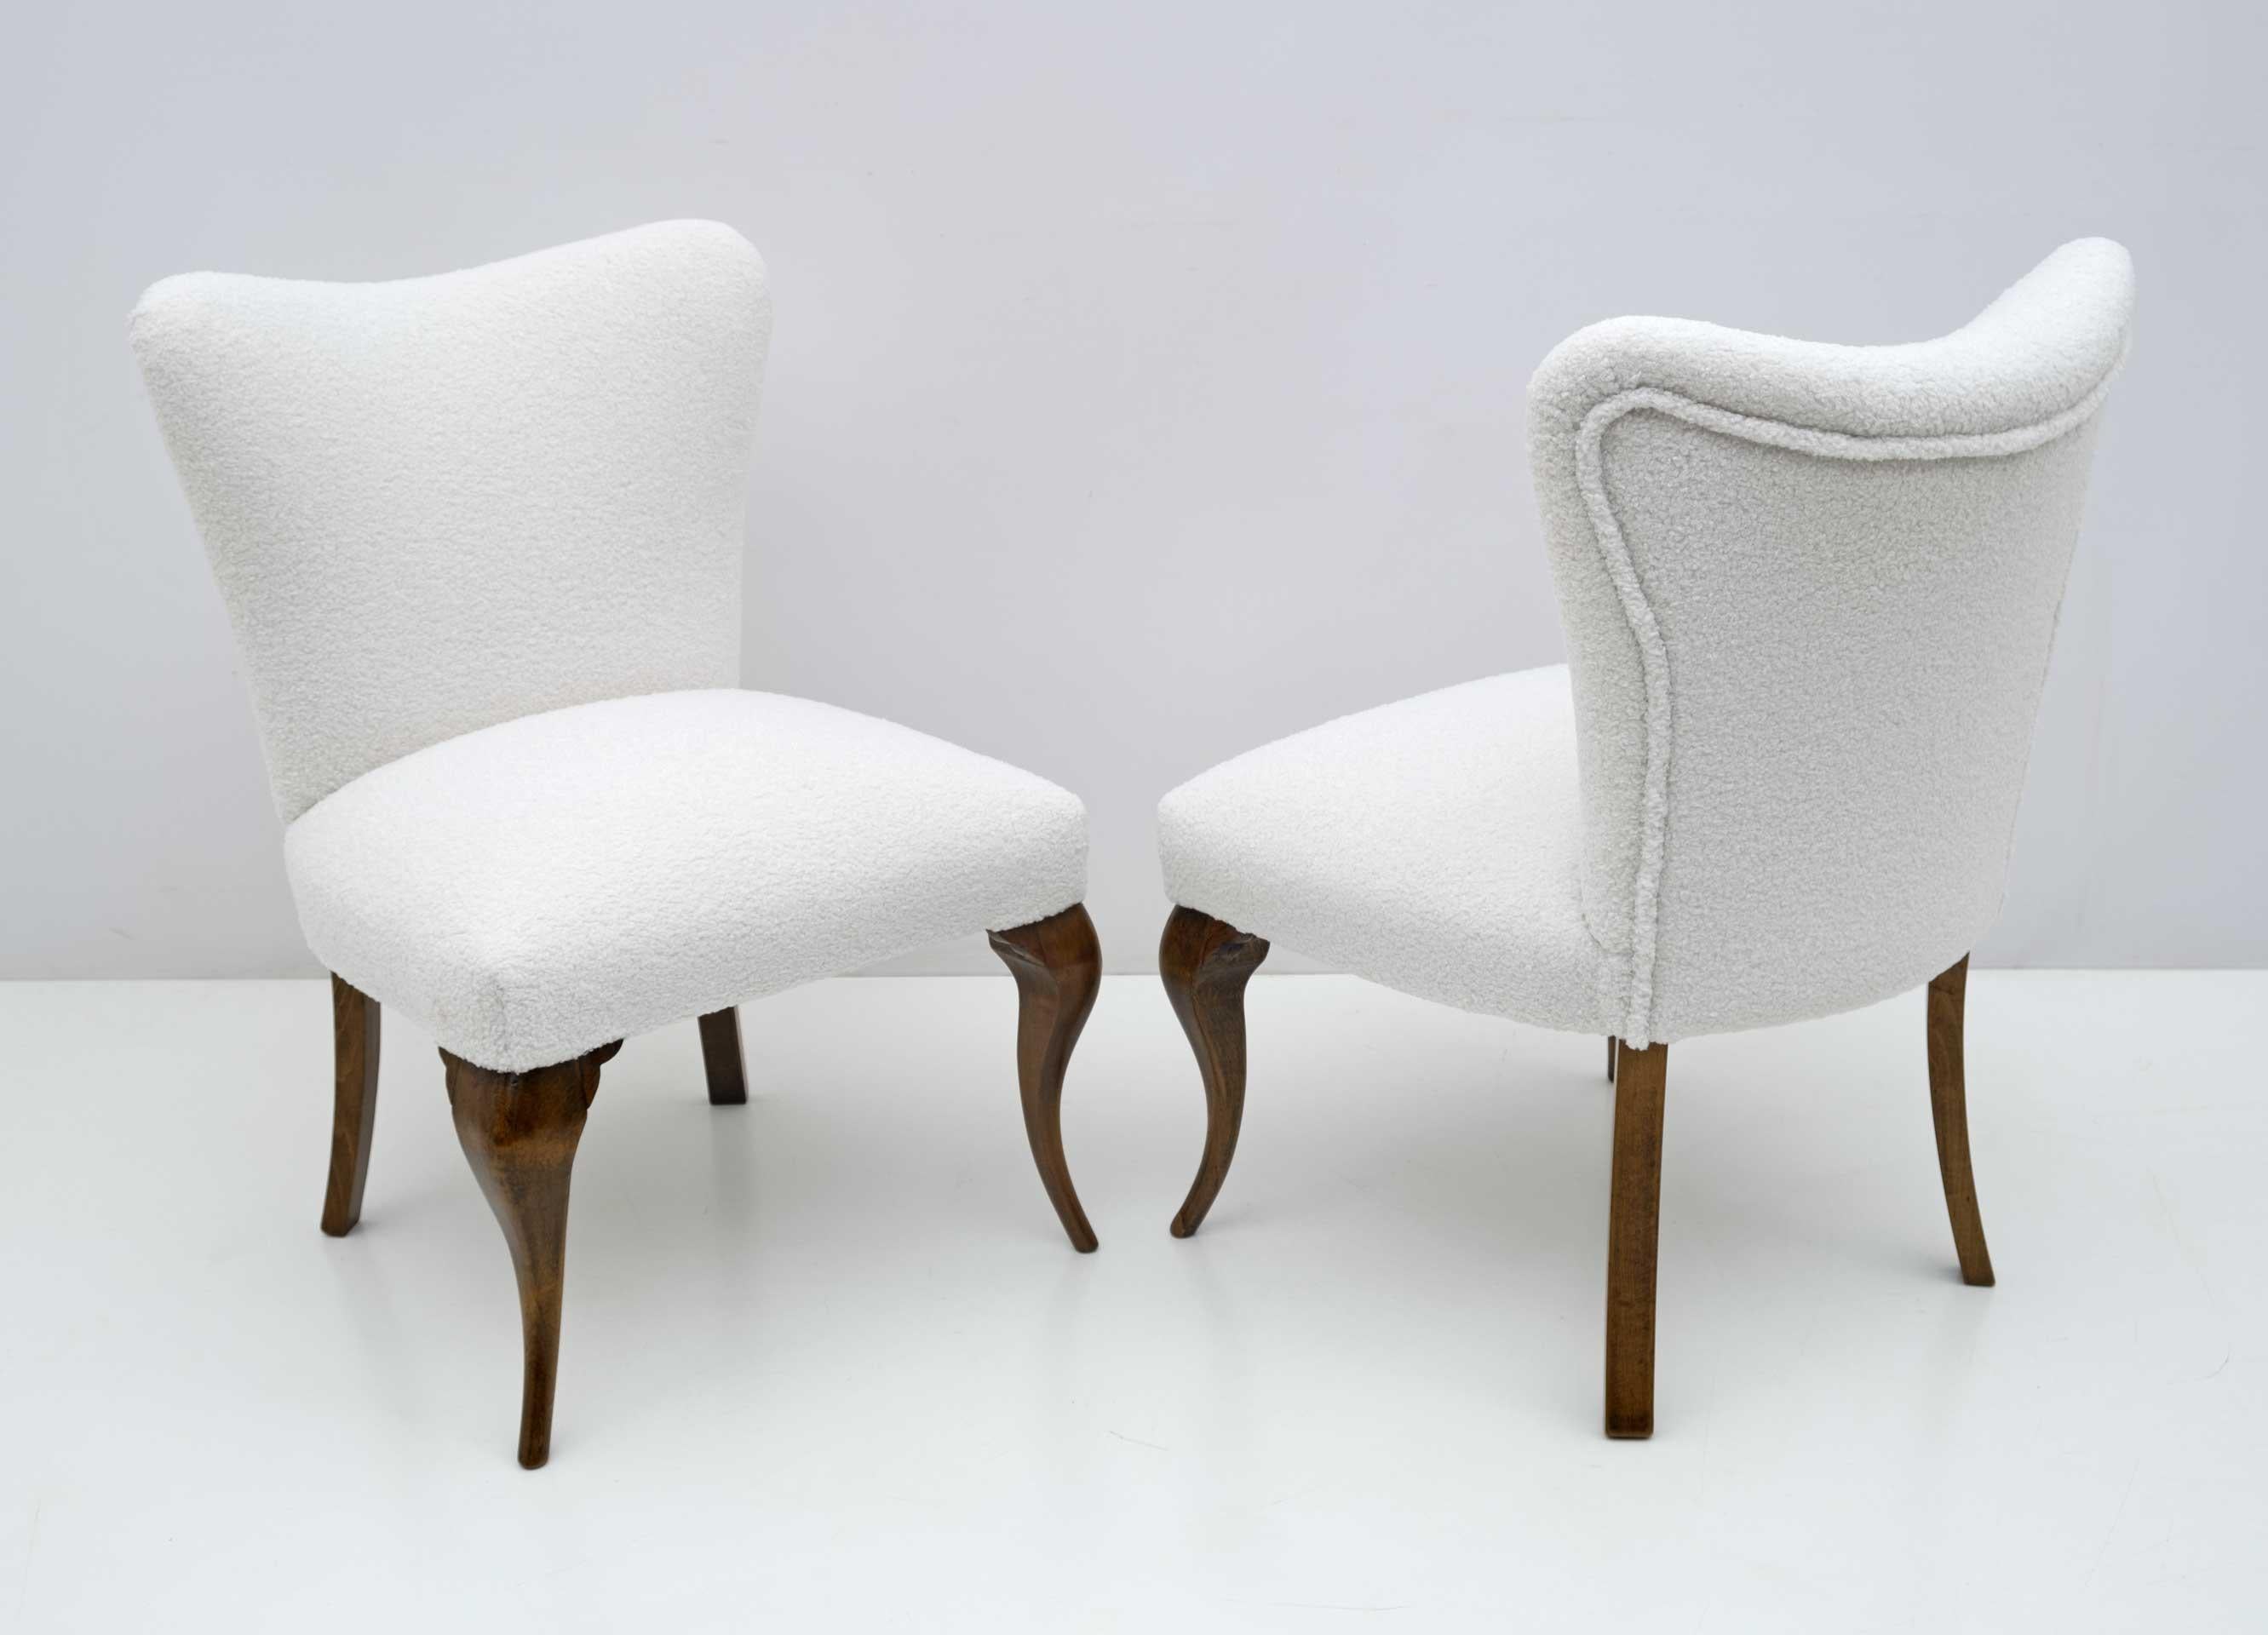 Pair of Chippendale style armchairs, Italian production in the 1940s, completely restored and upholstered in Boucle fabric. They fit very well in a bedroom or living room.